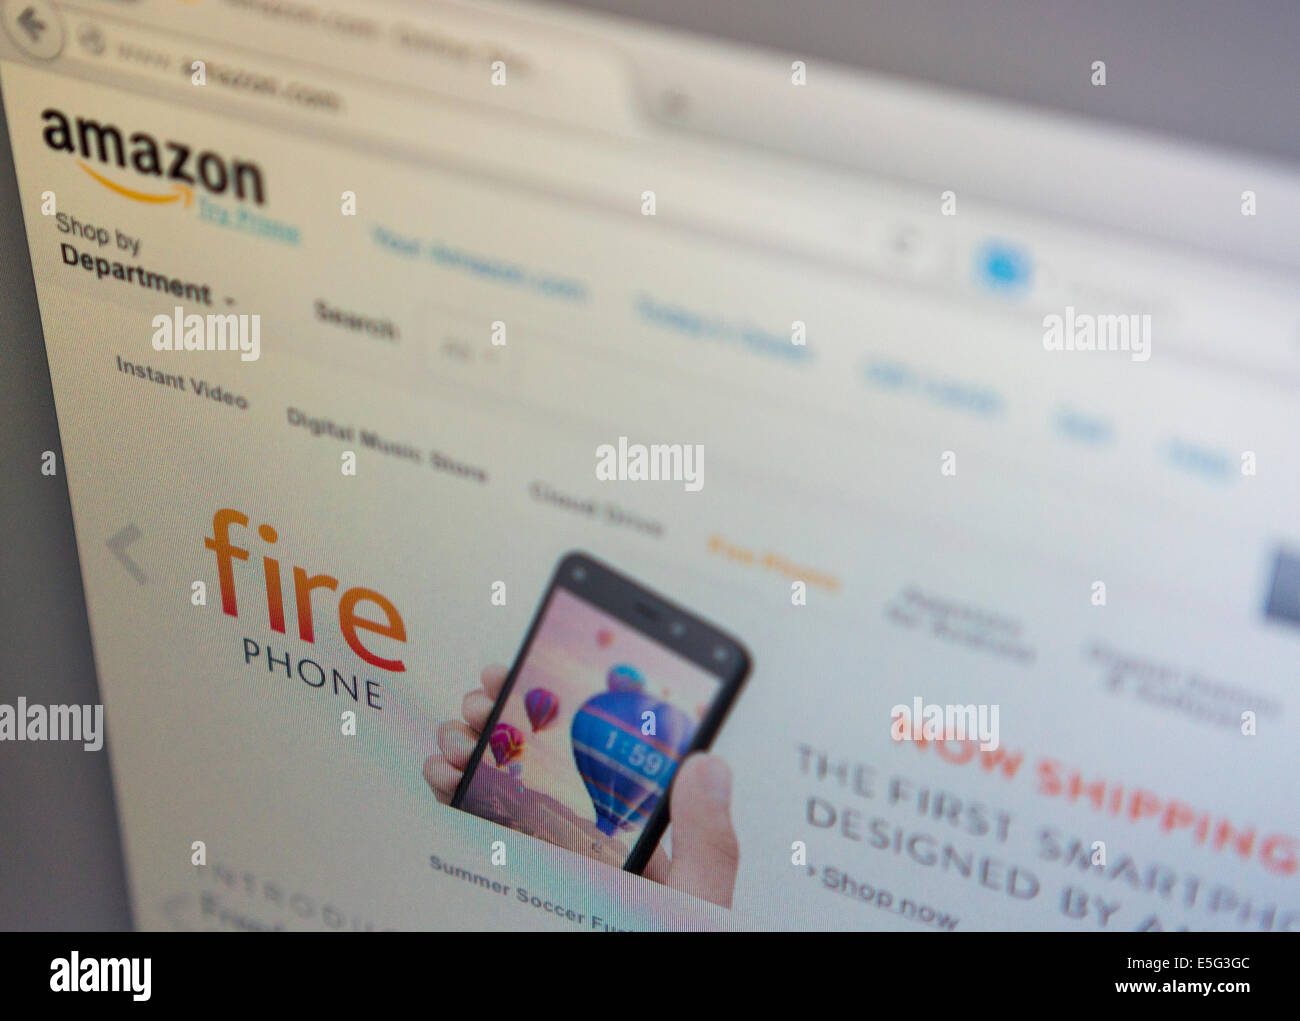 The Amazon website promoting their new Fire smartphone Stock Photo